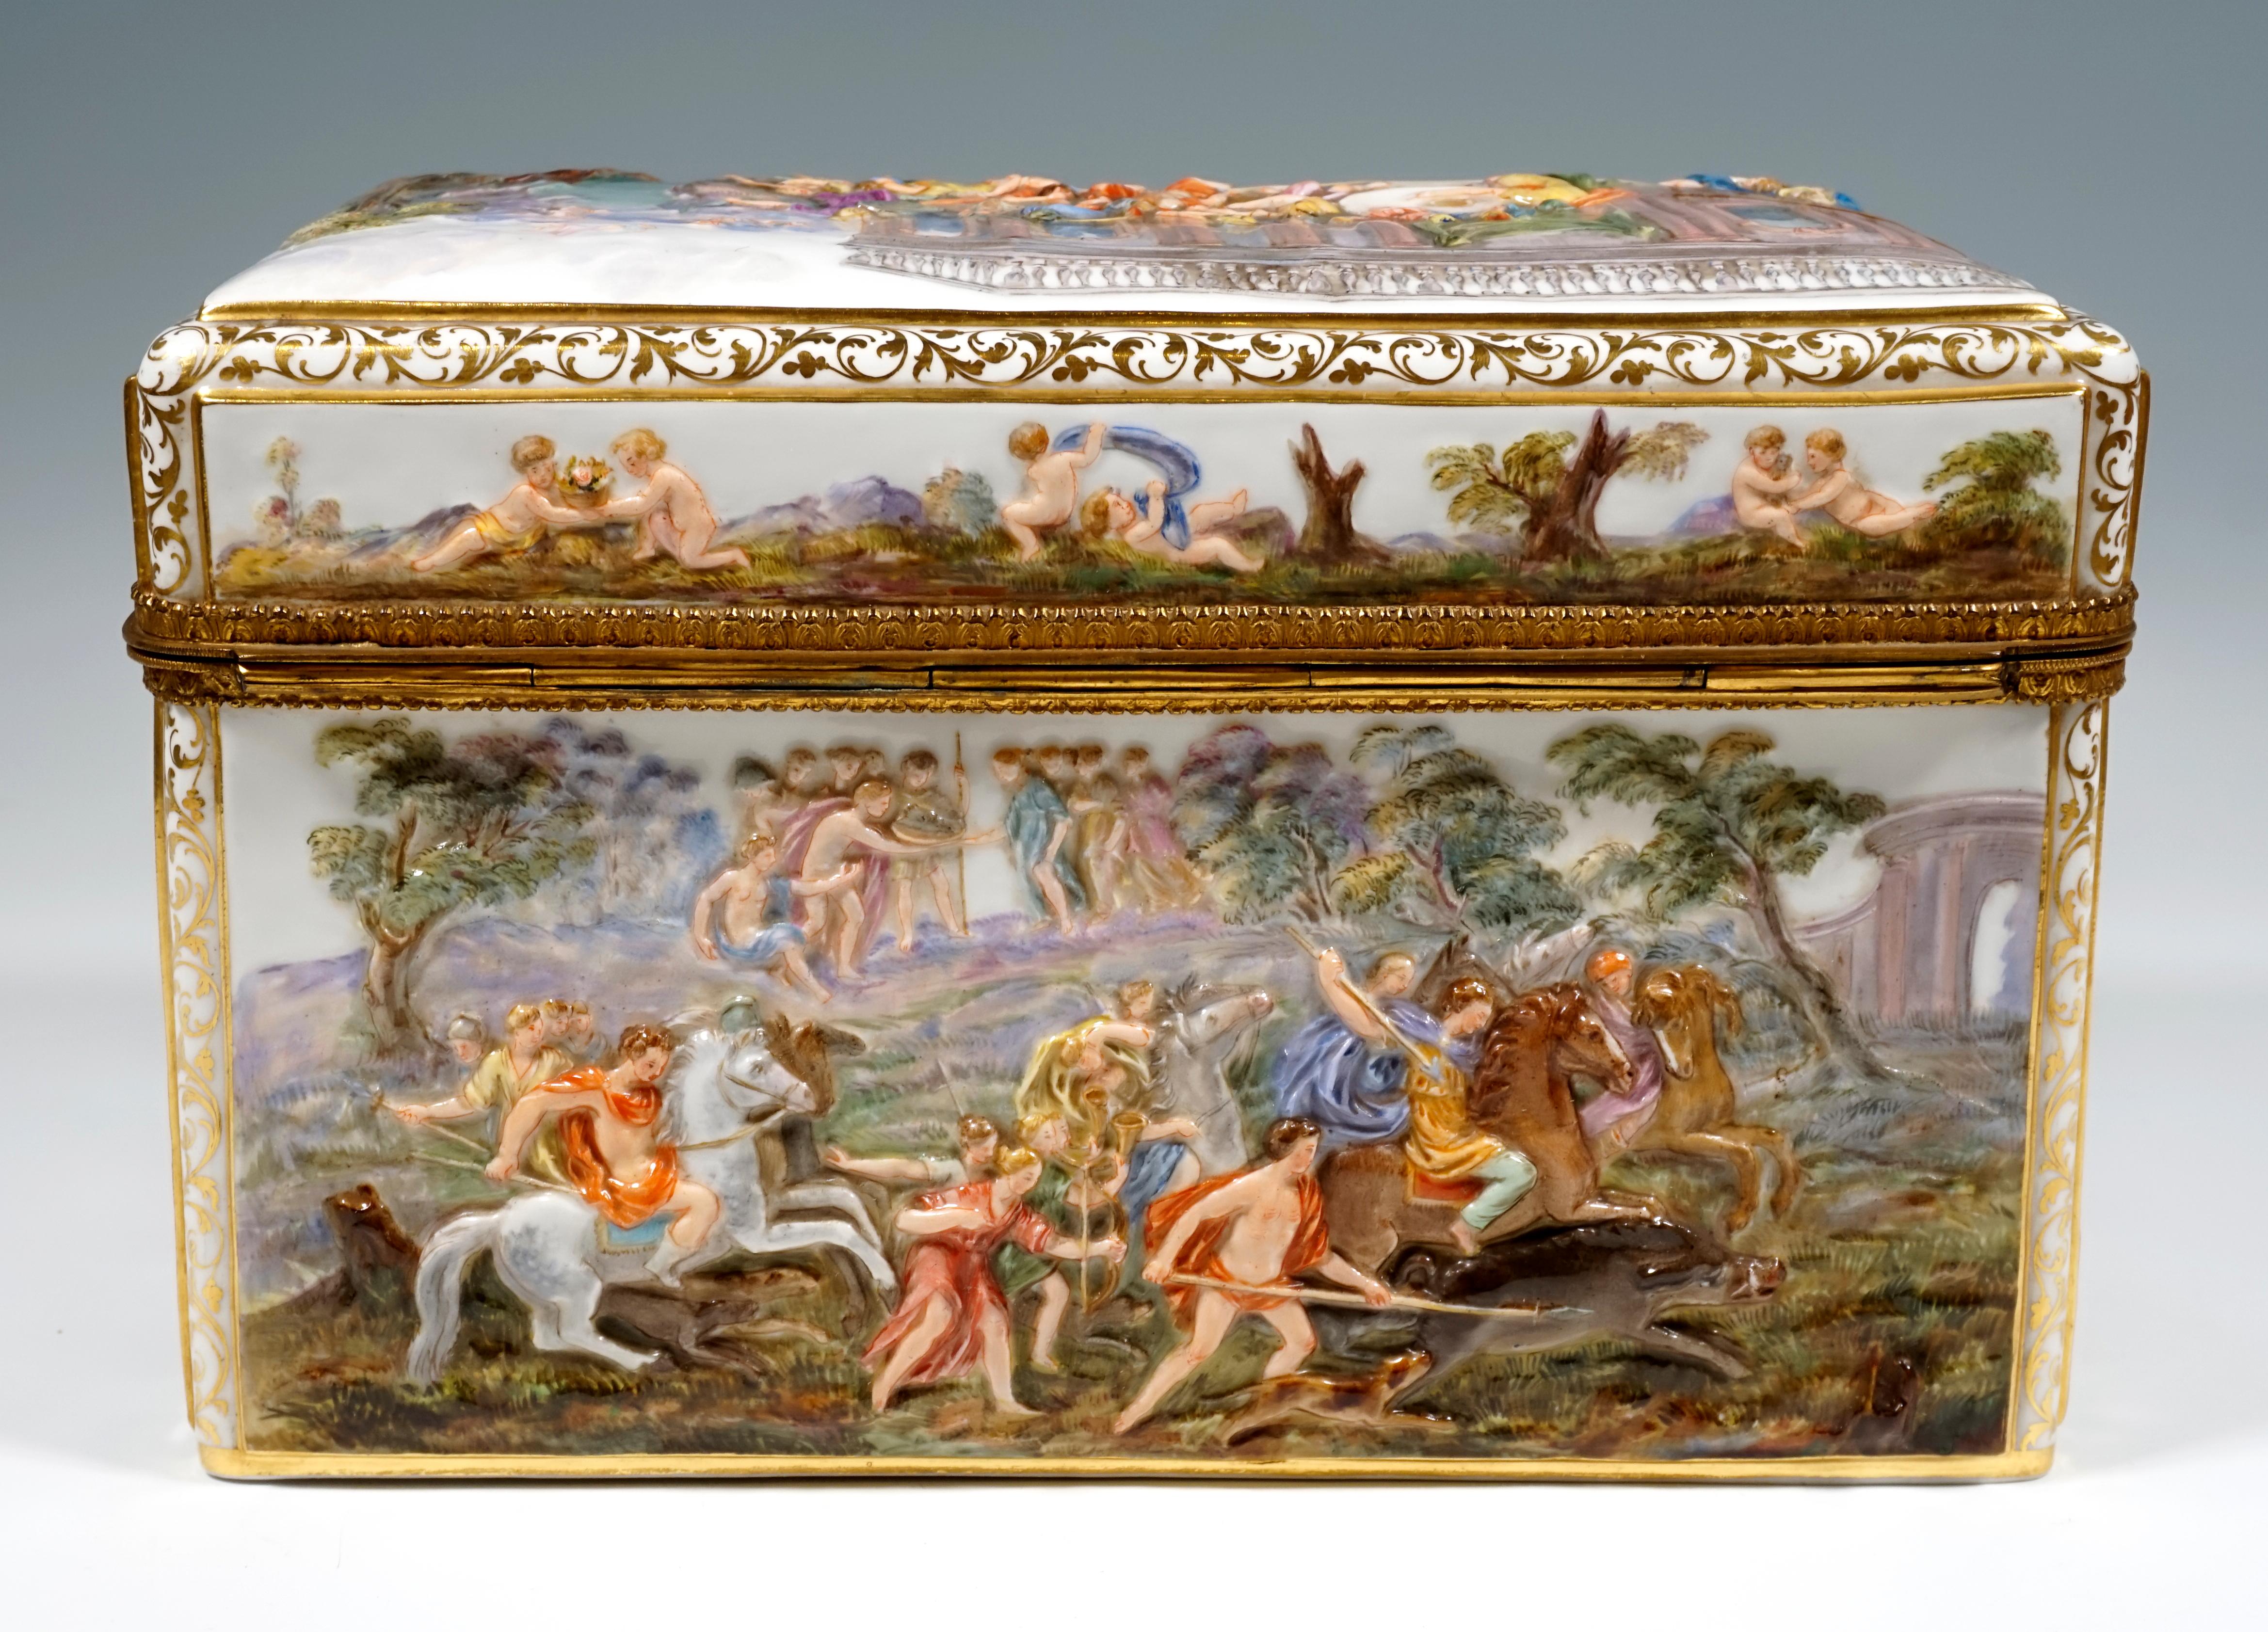 Porcelain 19th Century Meissen Jewelry Box With Colored Greek Mythology Reliefs